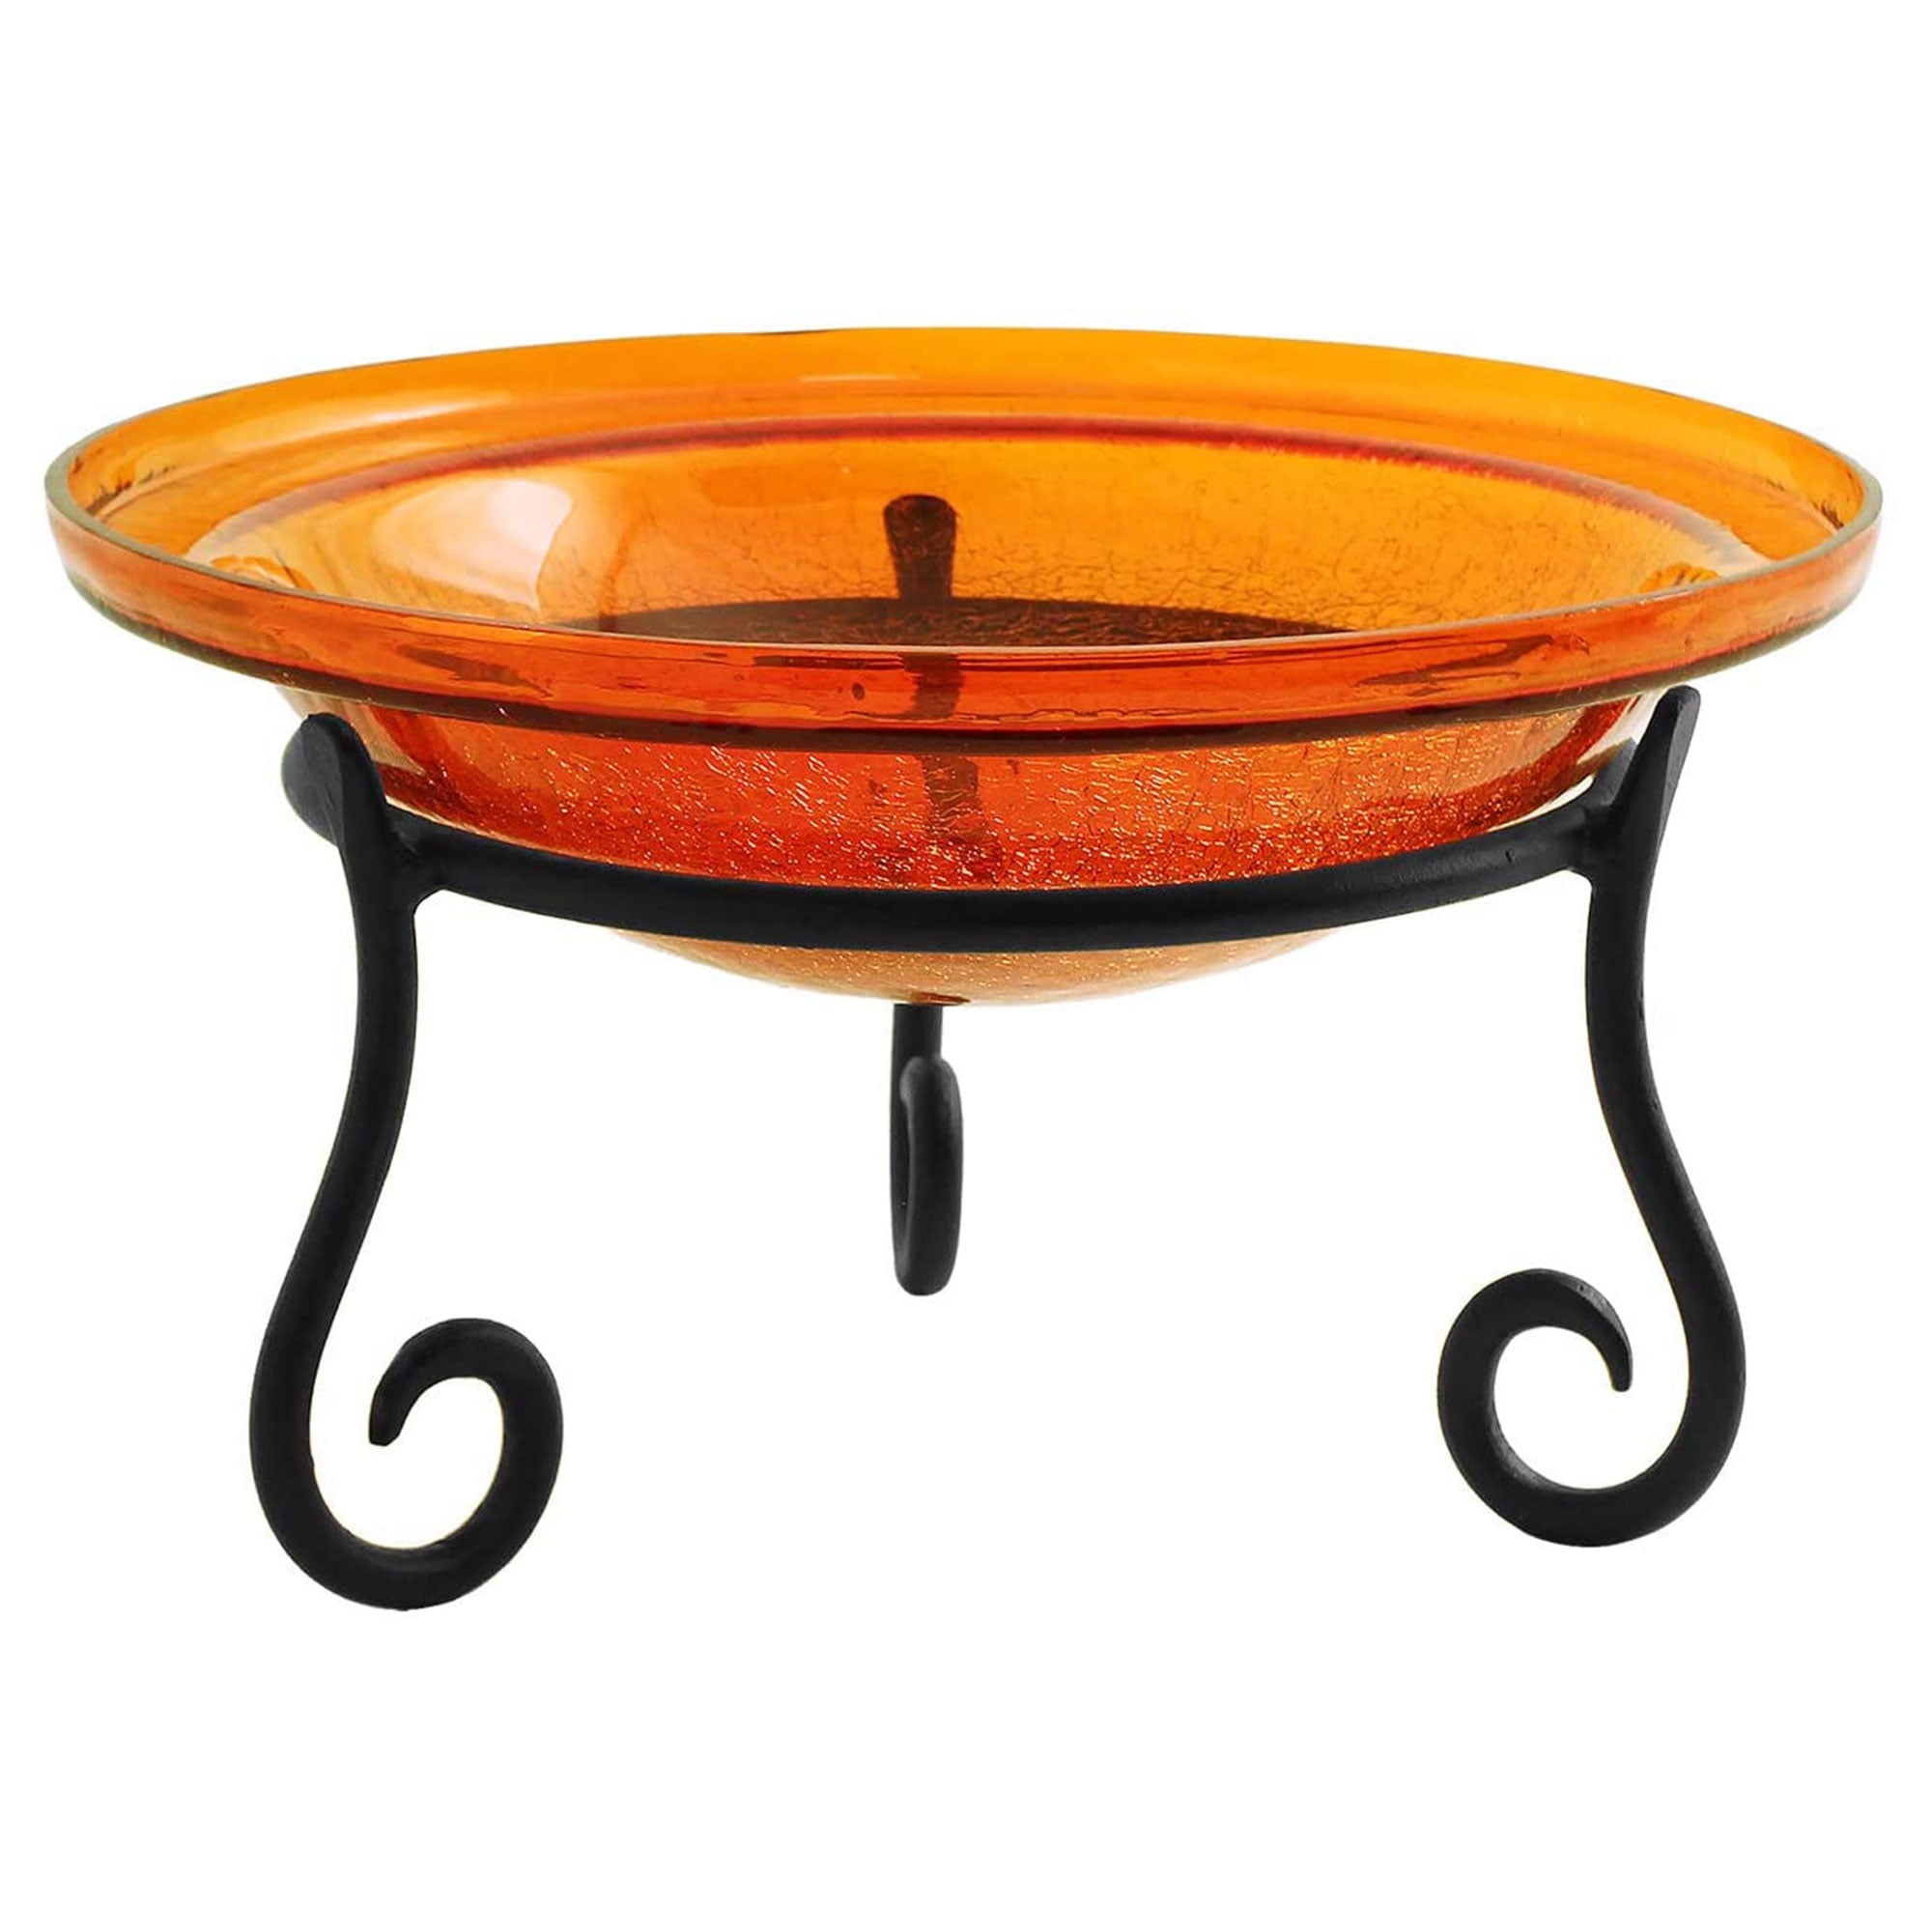 Picture of Achla CGB-06M-S1 12 in. Mandarin Crackle Birdbath with Short Stand